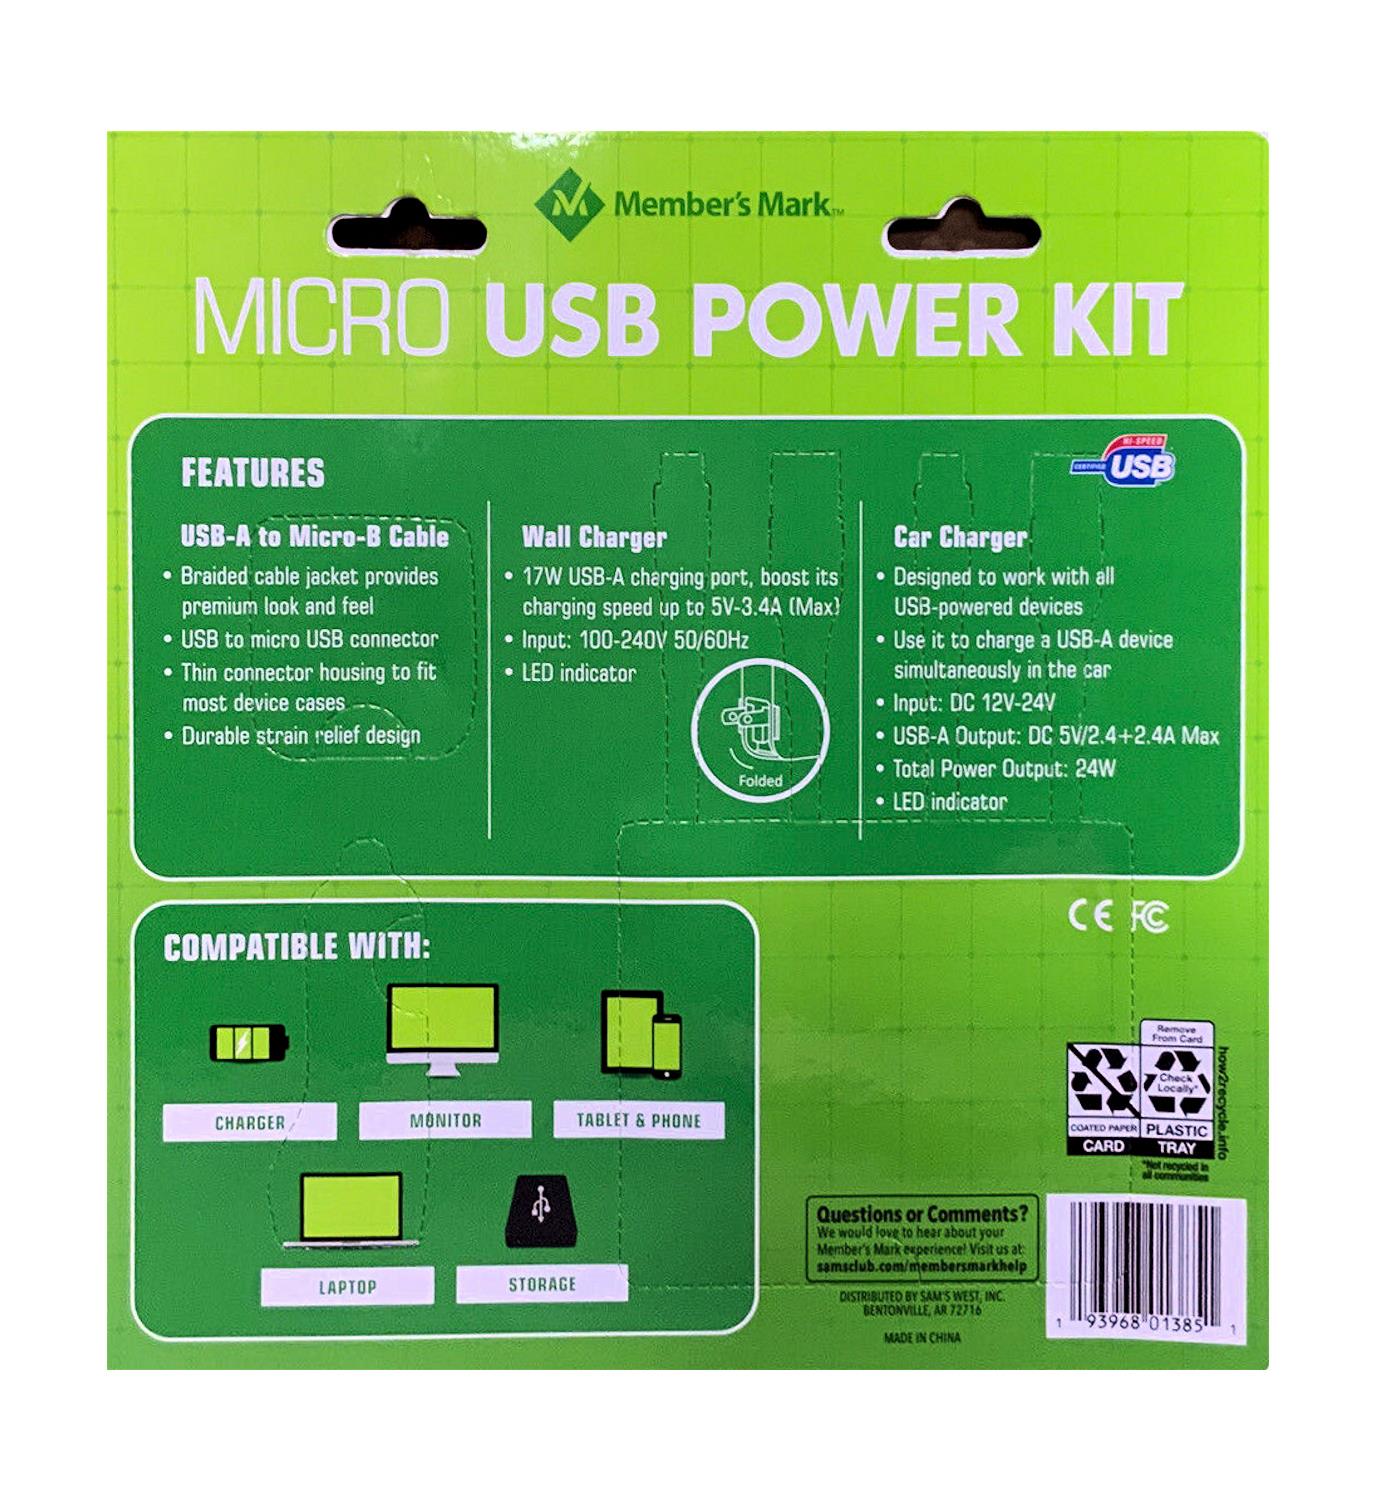 Micro USB Power Kit Dual Wall Charger, Dual Car Charger and 2 USB-A to Micro USB Cables